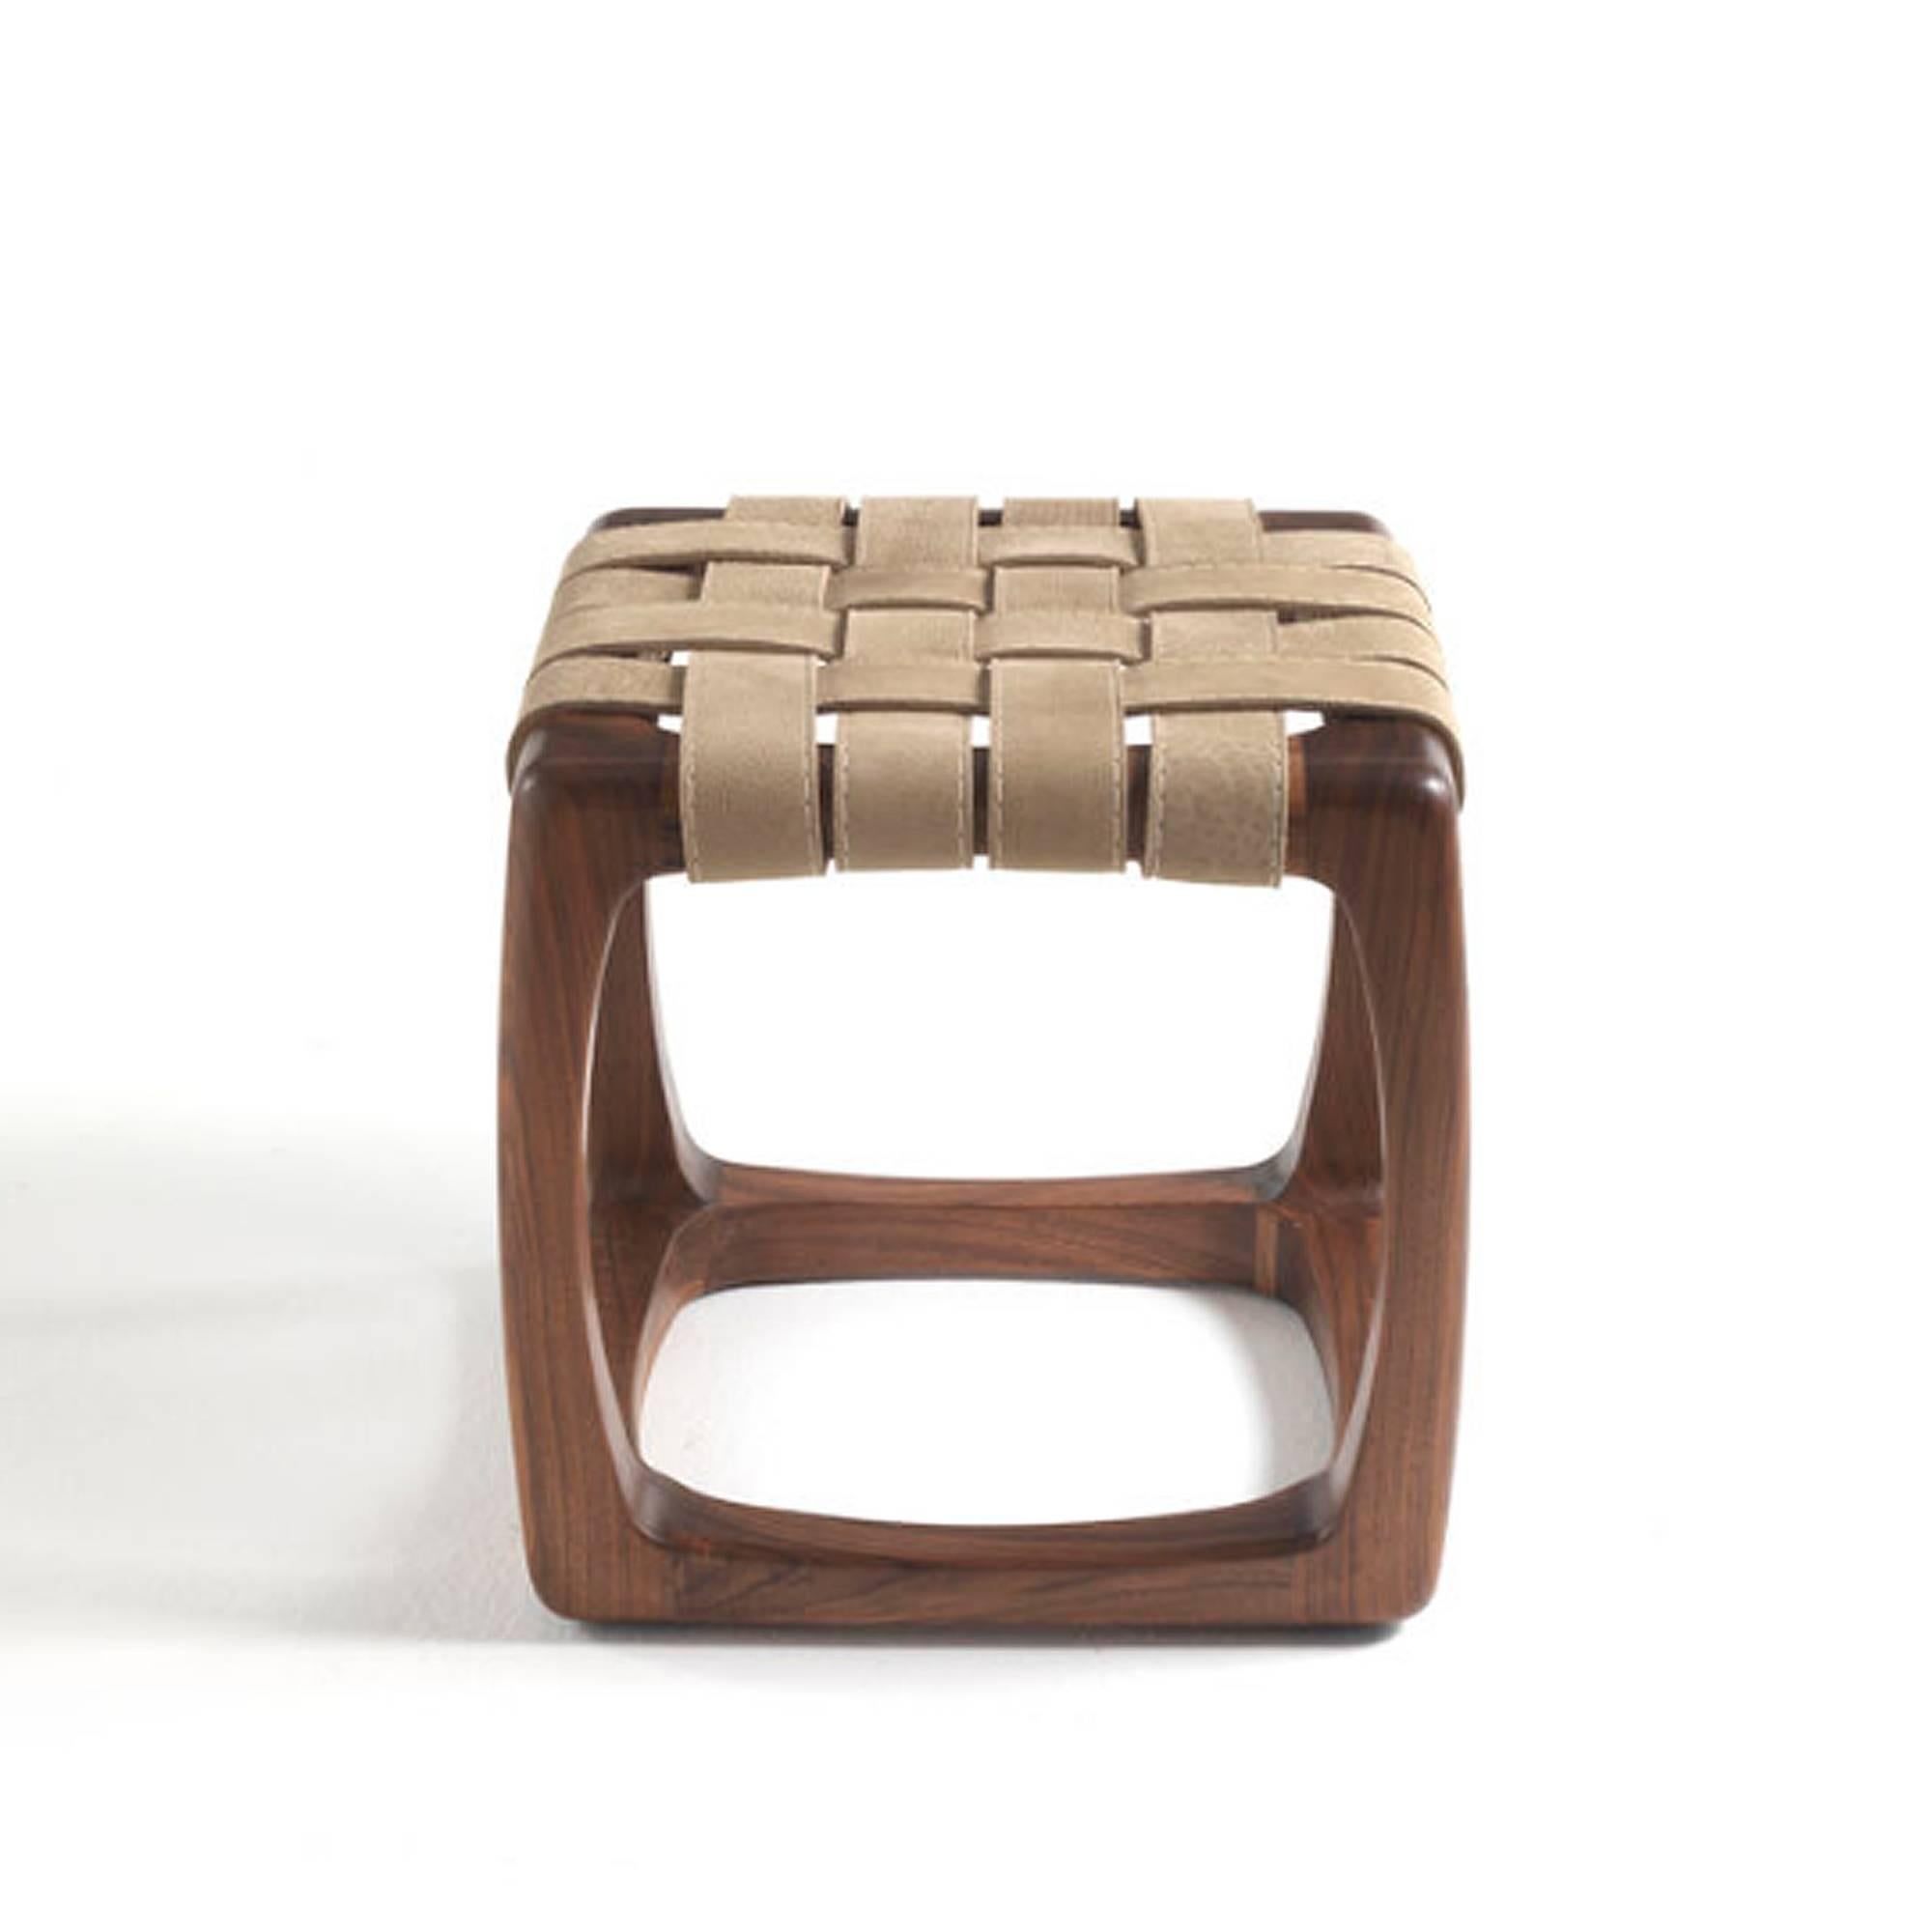 Hand-Crafted Berlingo Stool in Solid Polished Walnut with Leather Straps For Sale